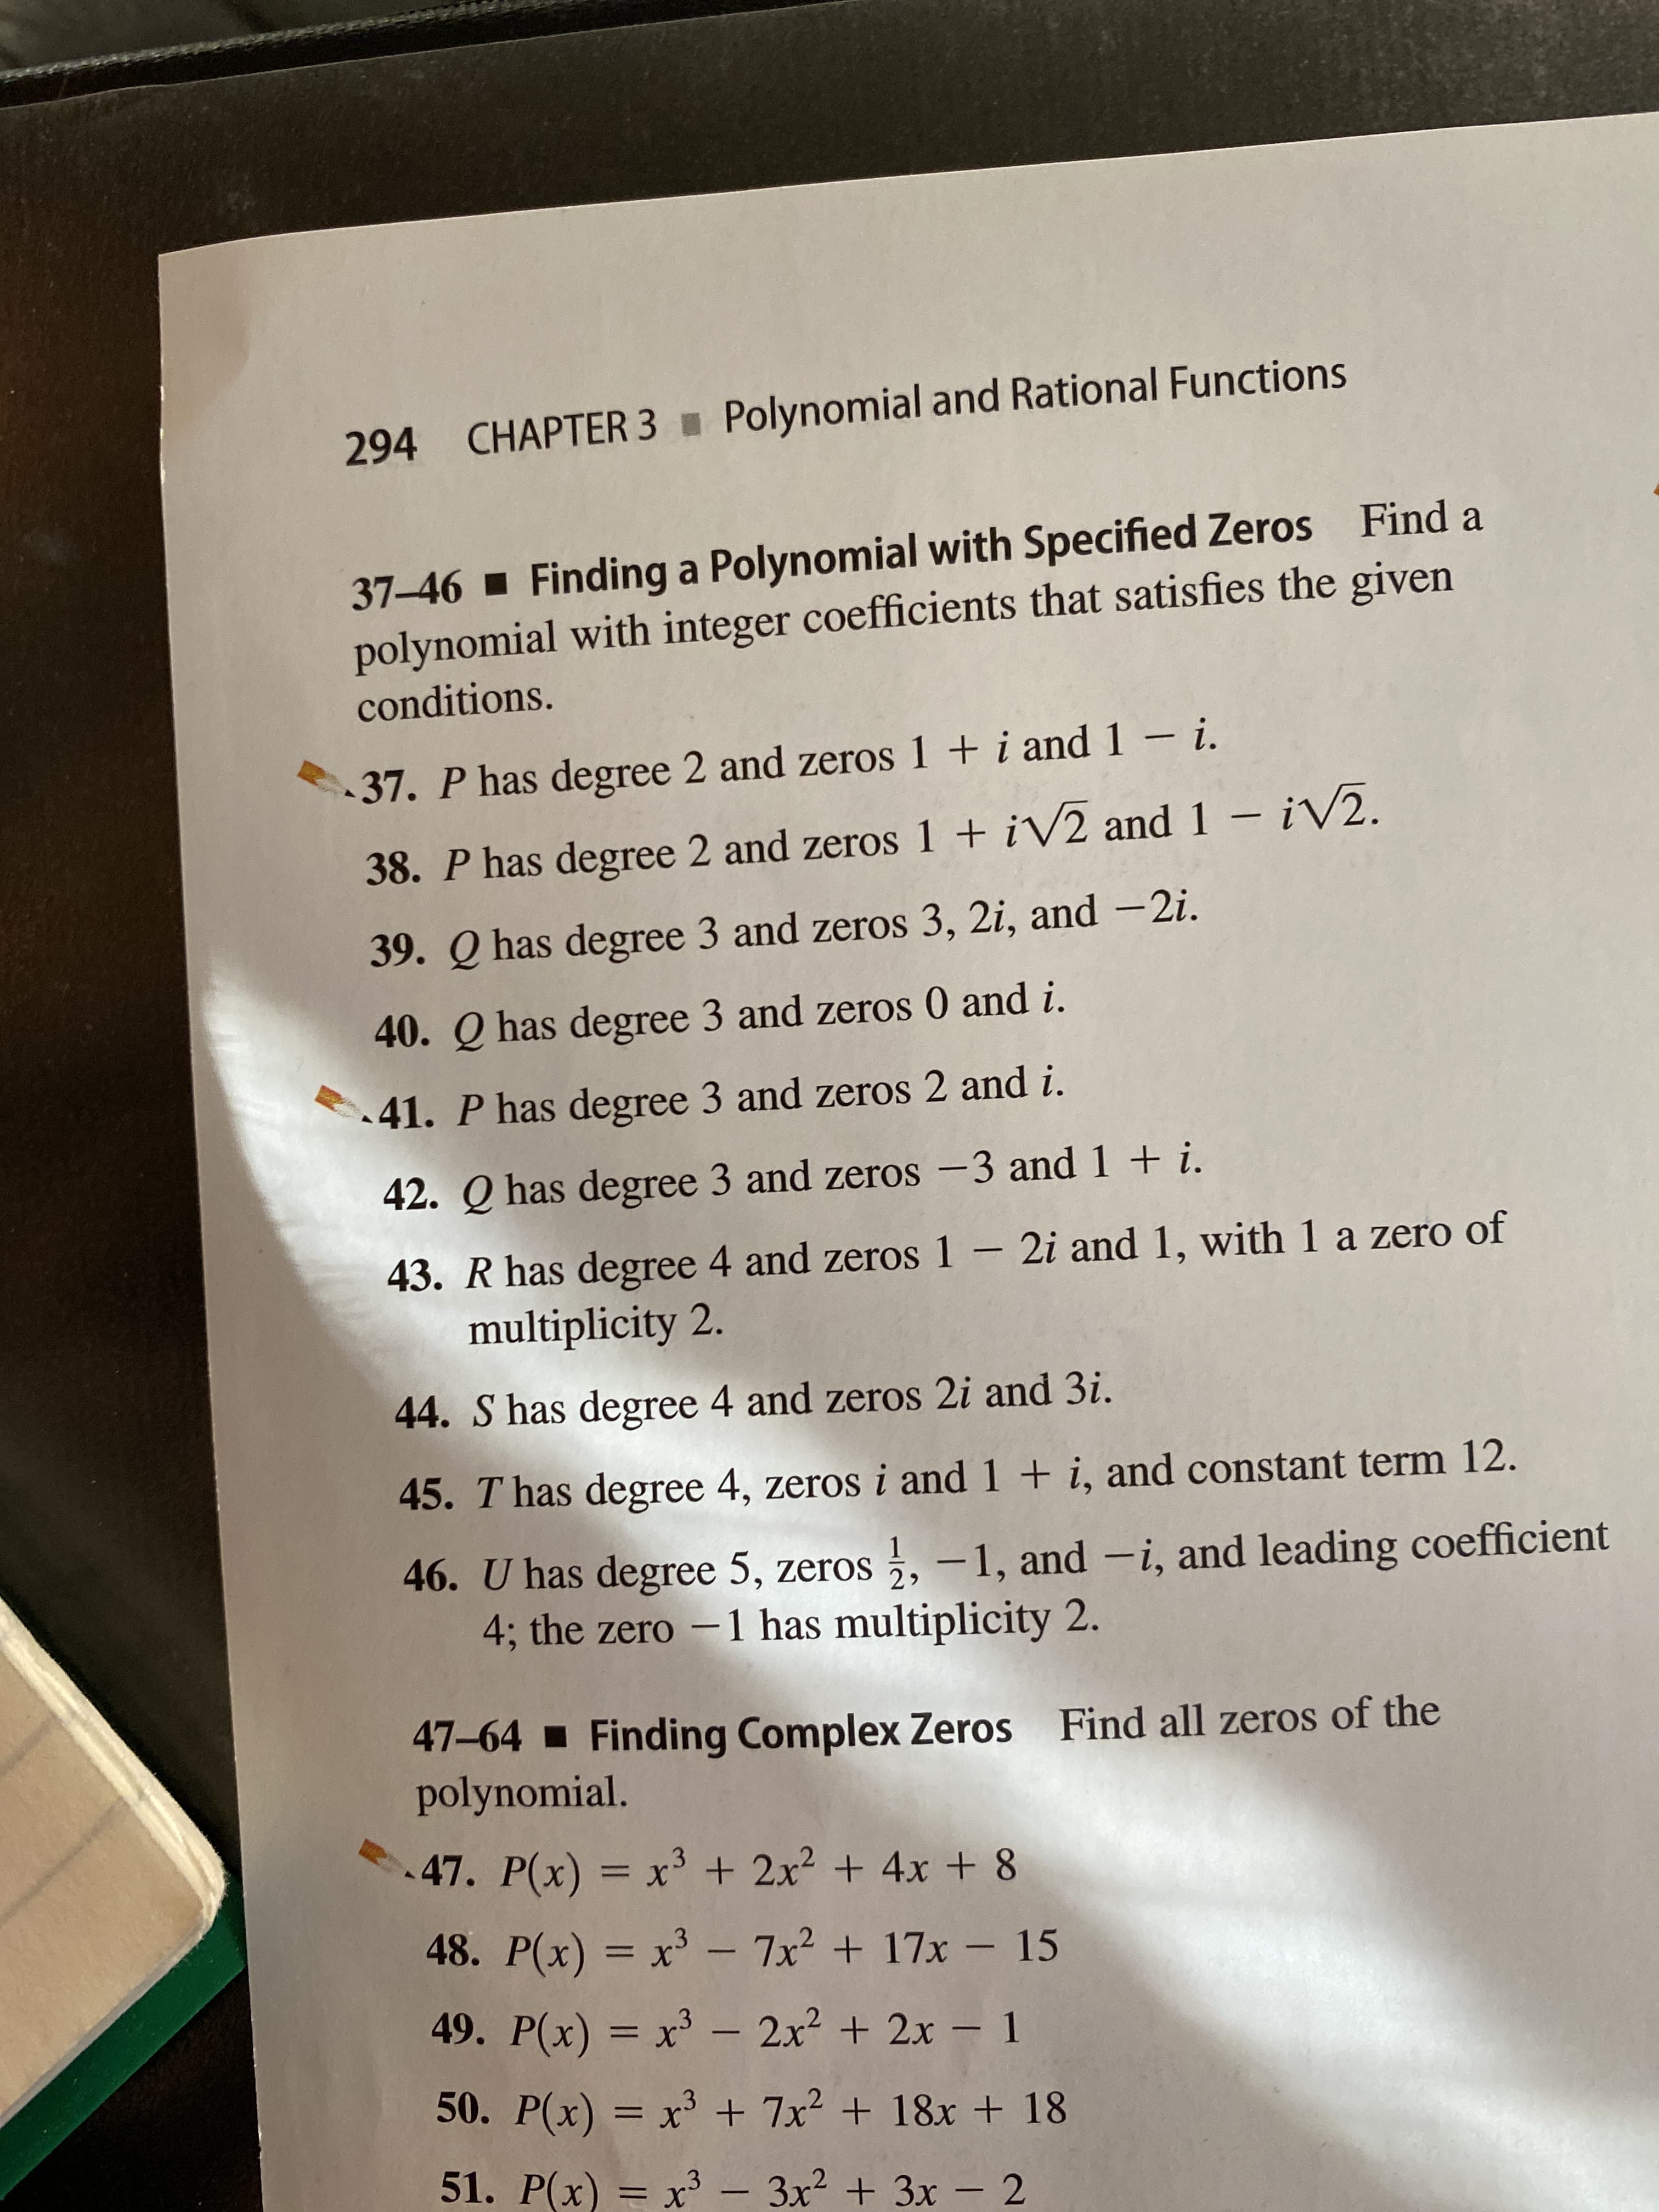 Polynomial and Rational Functions
CHAPTER 3
294
37-46 - Finding a Polynomial with Specified Zeros Find a
polynomial with integer coefficients that satisfies the given
conditions.
37. P has degree 2 and zeros 1 + i and 1 -i.
– ¡V2.
38. P has degree 2 and zeros 1 + iV2 and 1
39. Q has degree 3 and zeros 3, 2i, and –2i.
40. Q has degree 3 and zeros 0 and i.
.41. P has degree 3 and zeros 2 and i.
42. Q has degree 3 and zeros –3 and 1 + i.
43. R has degree 4 and zeros 1 - 2i and 1, with 1 a zero of
multiplicity 2.
44. S has degree 4 and zeros 2i and 3i.
45. T has degree 4, zeros i and 1 + i, and constant term 12.
46. U has degree 5, zeros , –1, and -i, and leading coefficient
4; the zero -1 has multiplicity 2.
2
47–64 - Finding Complex Zeros
polynomial.
Find all zeros of the
47. P(x) = x³ + 2x? + 4x + 8
%3D
48. P(x) = x³ – 7x² + 17x – 15
49. P(x) = x³ - 2x2 + 2x - 1
50. P(x) = x³ + 7x2 + 18x + 18
51. P(x) = x³ - 3x2 + 3x – 2
